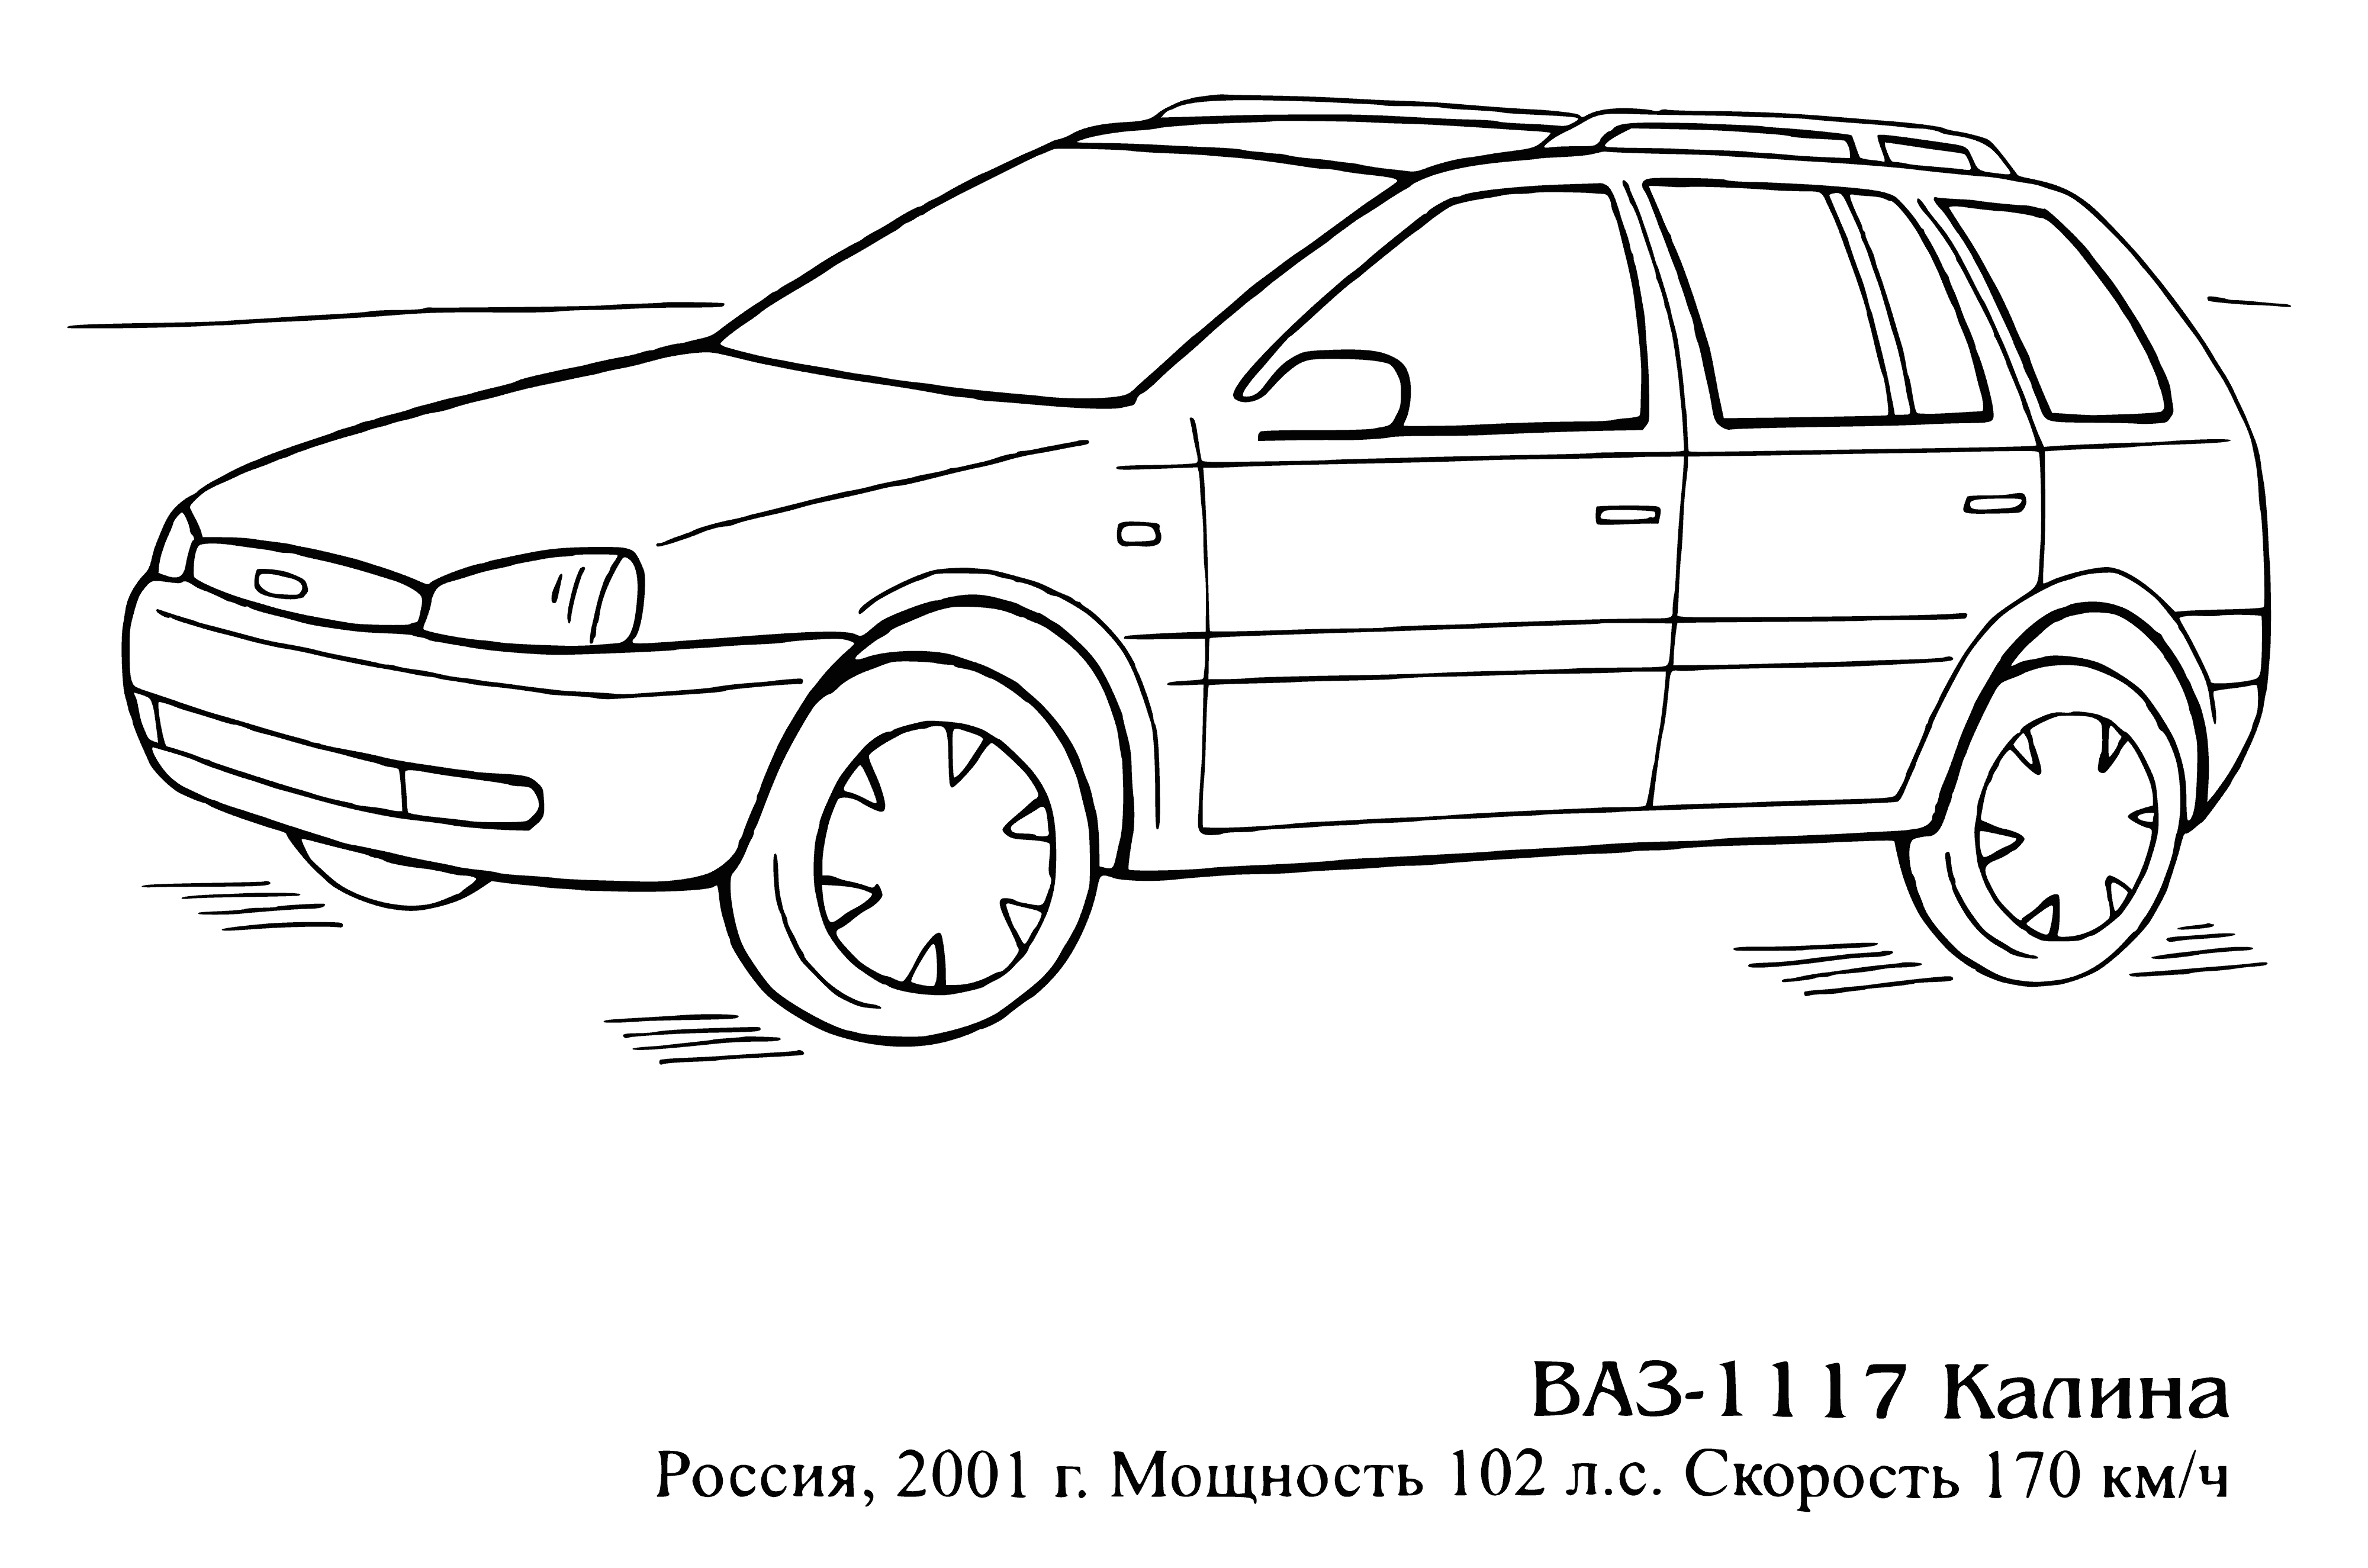 coloring page: #VAZ1117Kalina is an economical and reliable car designed for city driving.